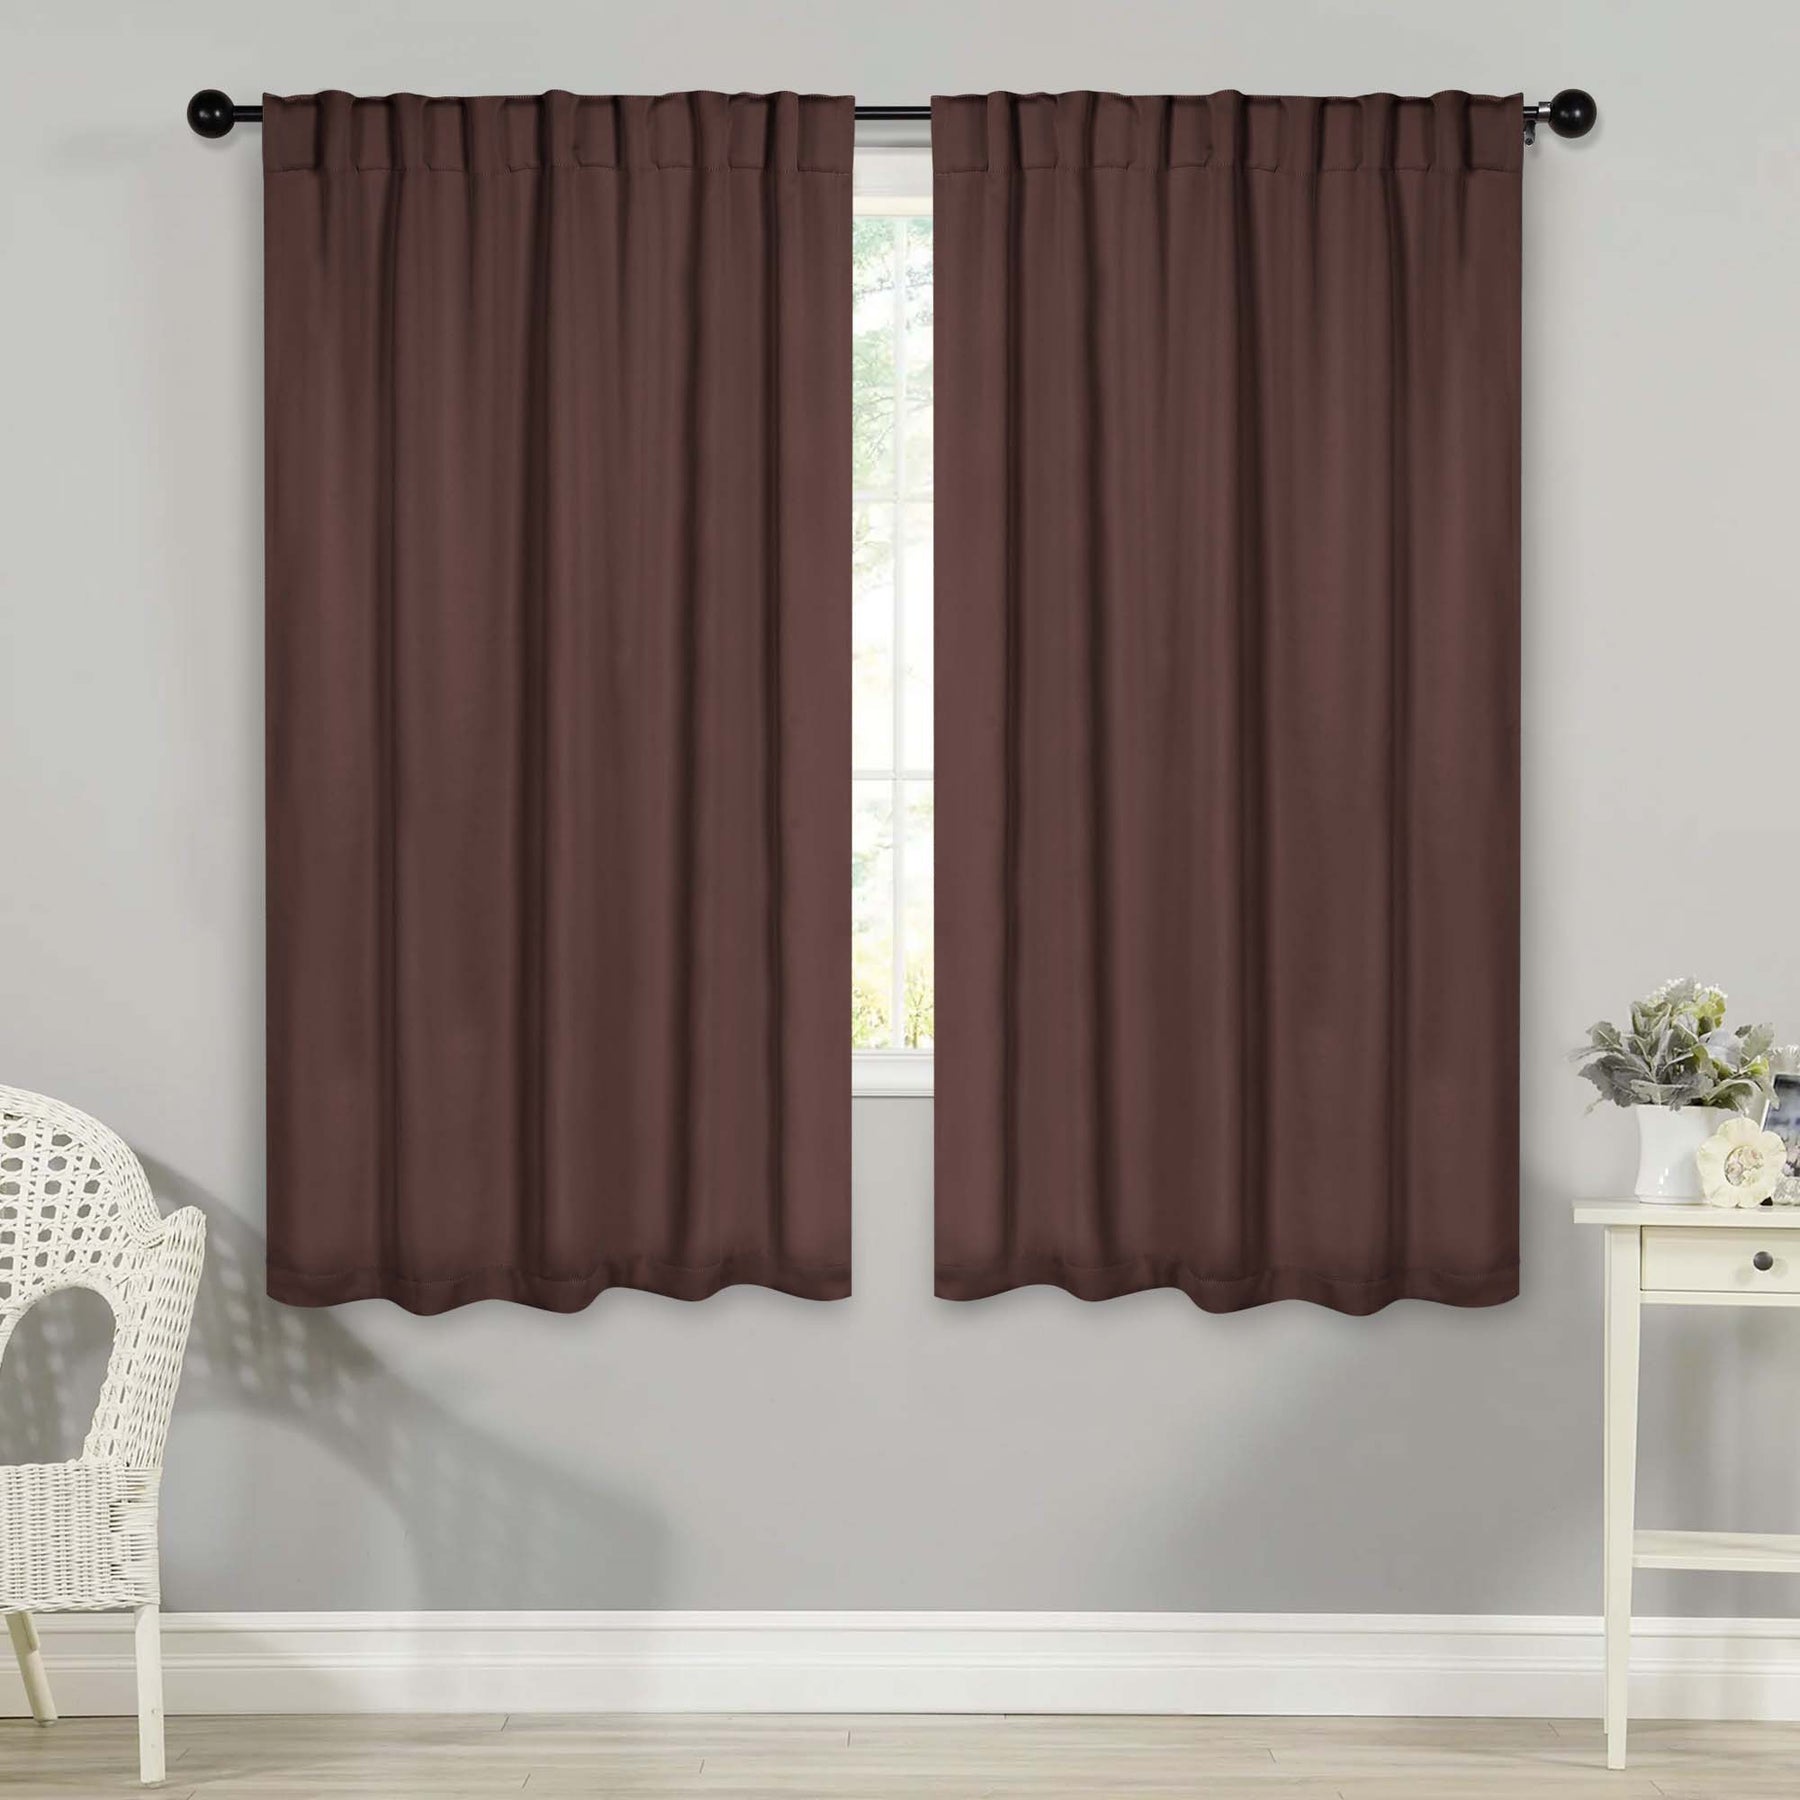 Classic Modern Rod Pocket Solid Blackout Curtain Set - Cappuccino